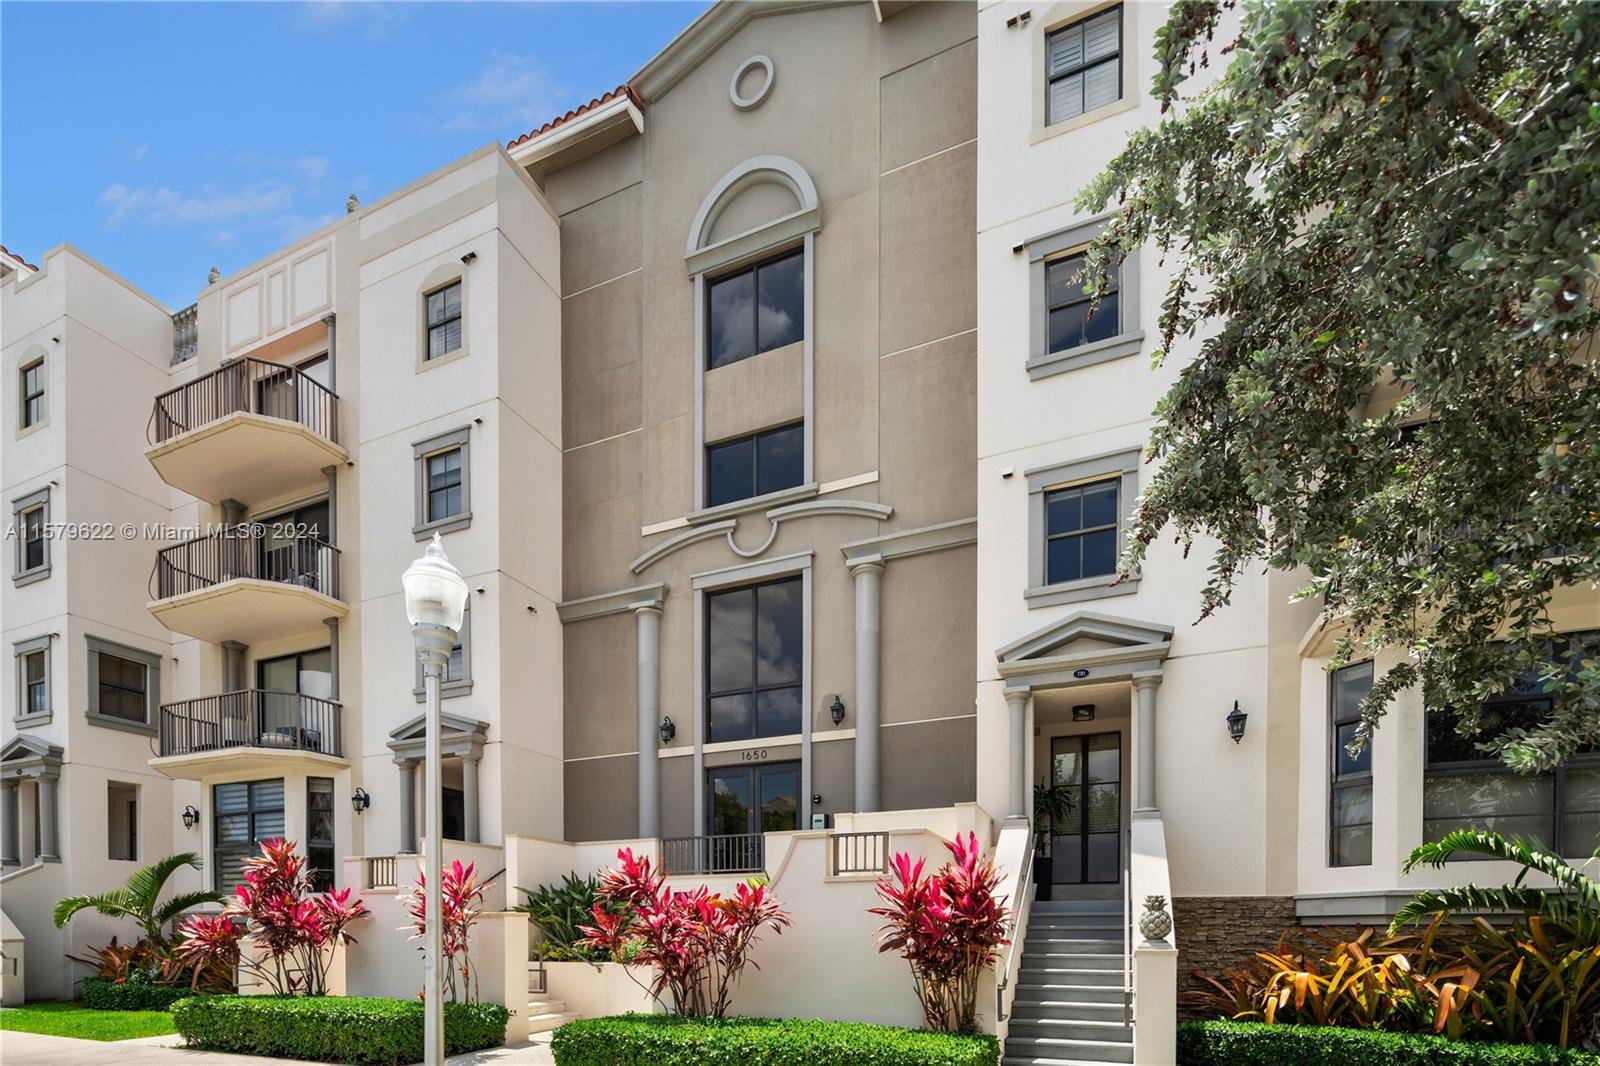 Photo of 1650 Galiano St #309 in Coral Gables, FL